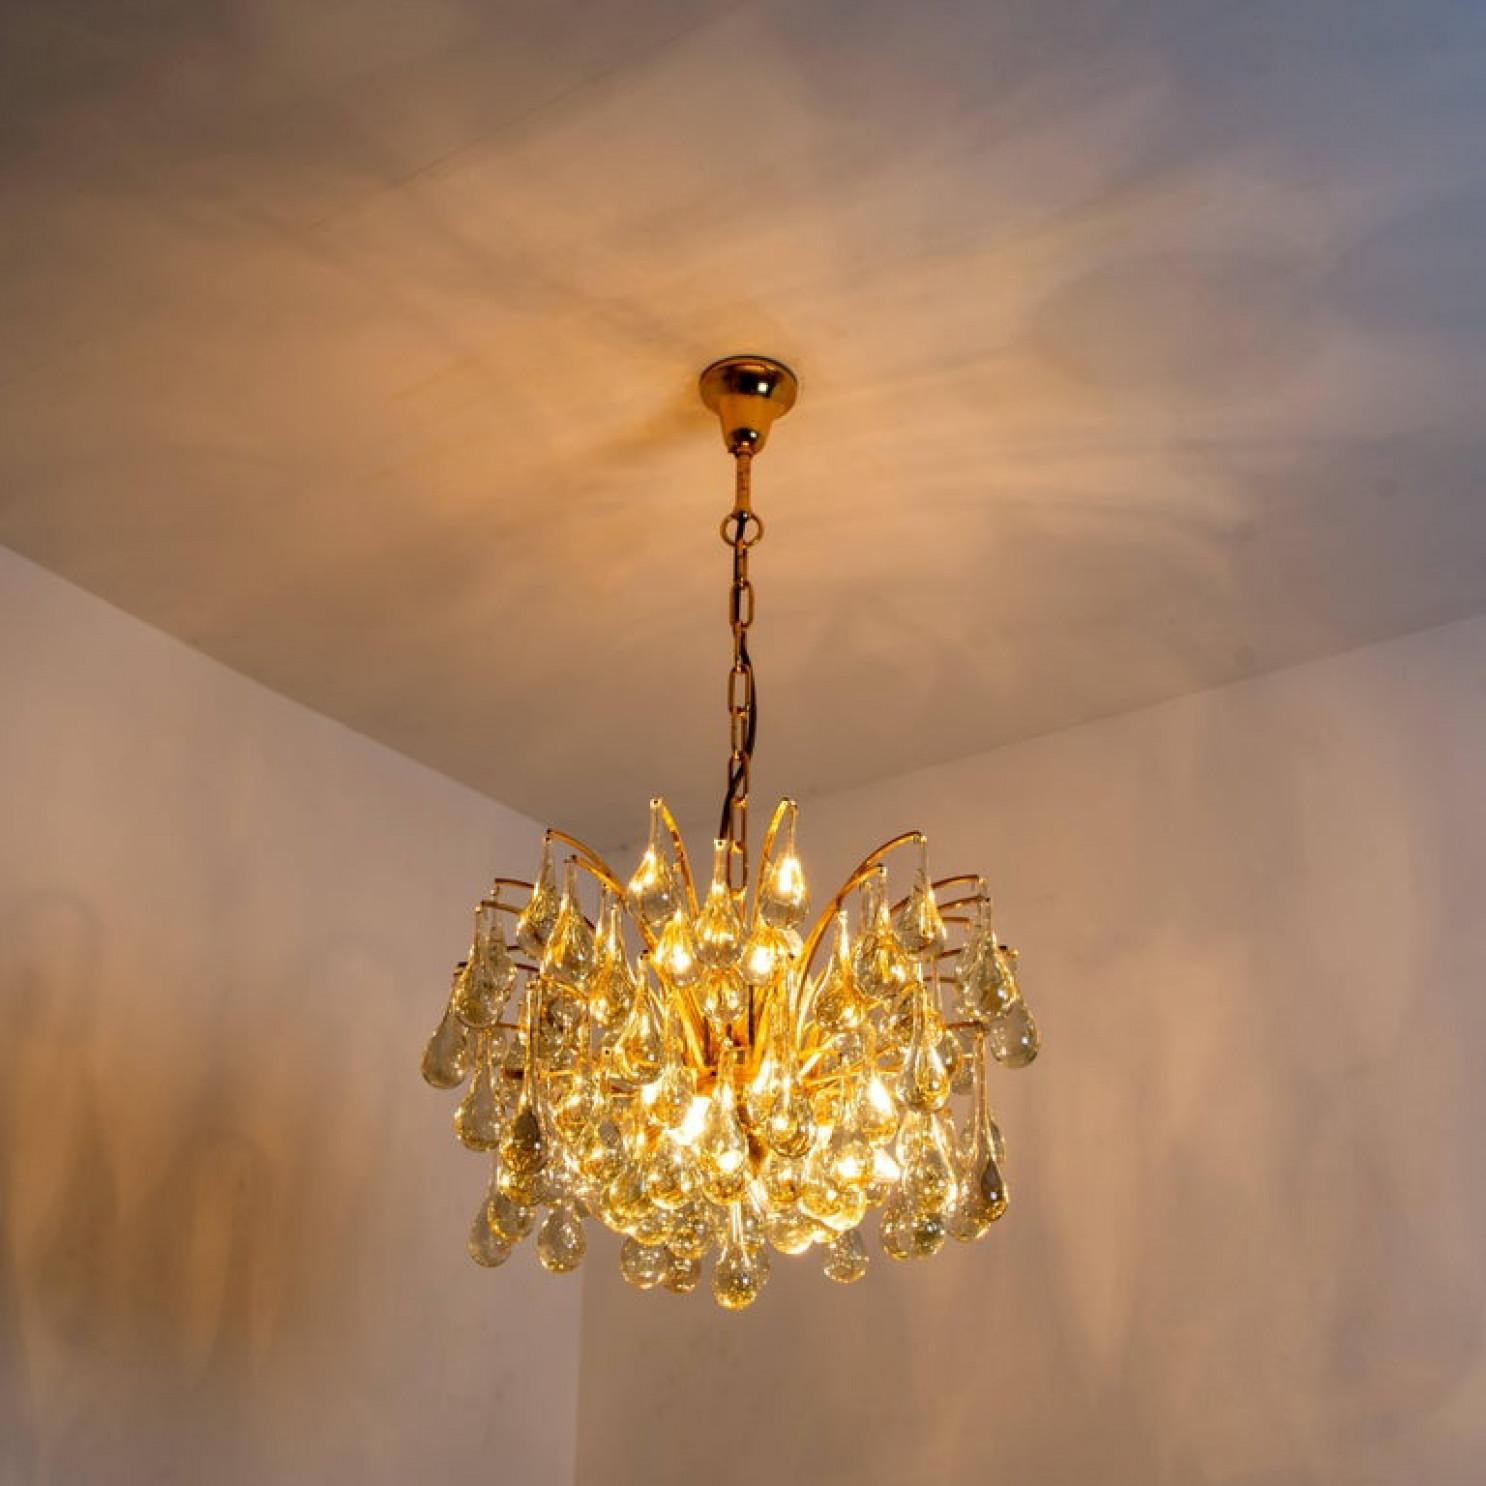 1 of the 2 Large Brass and Crystal Chandeliers, Ernst Palme, Germany, 1970s For Sale 8